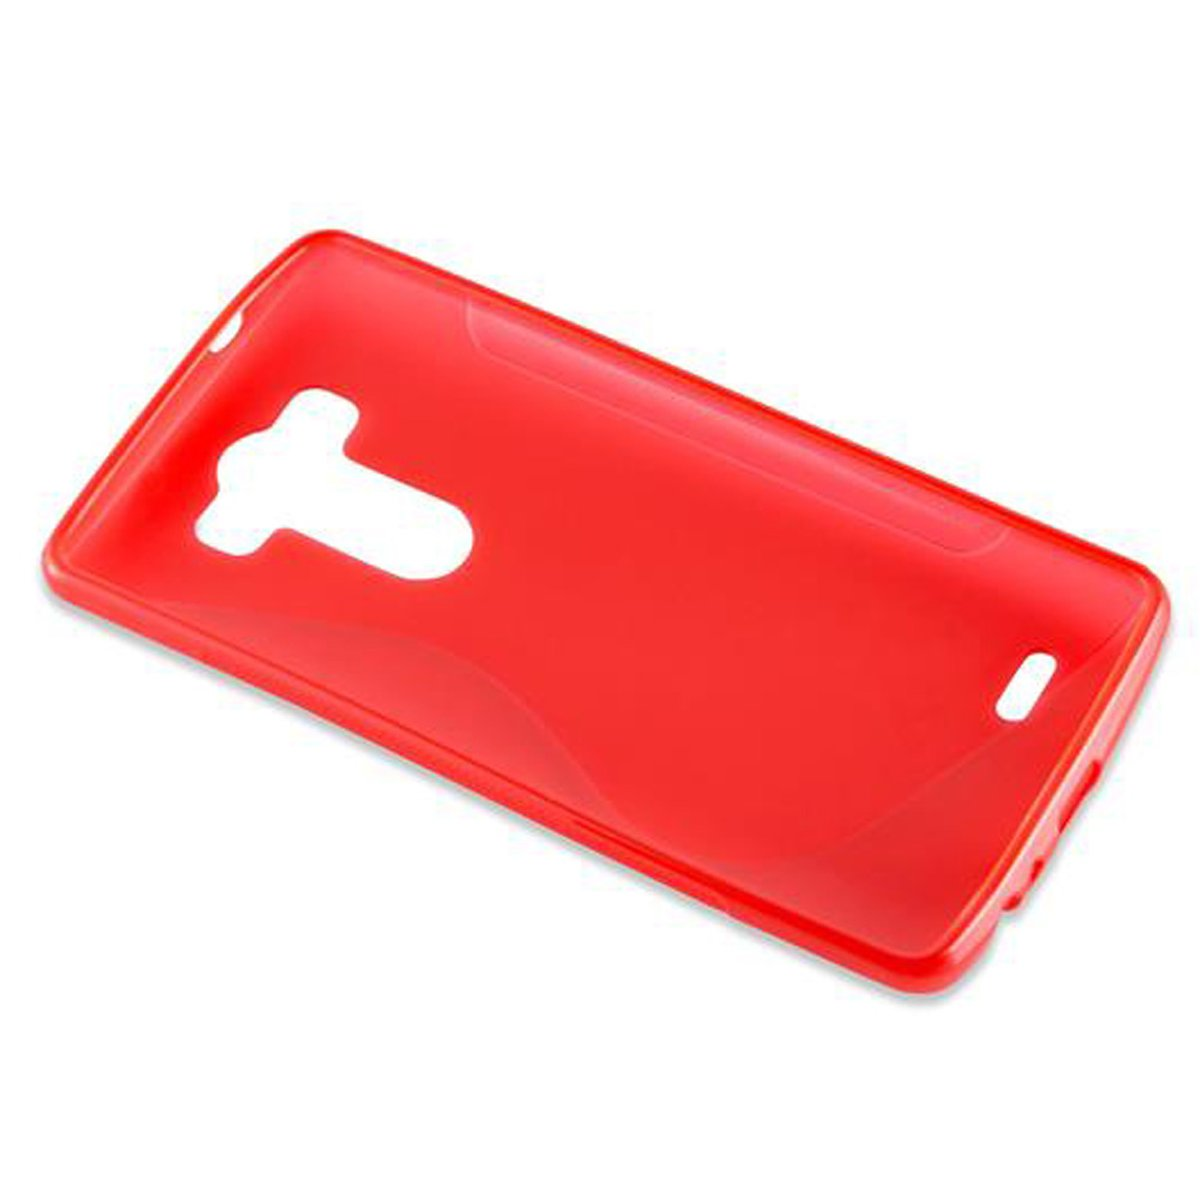 CADORABO TPU G3 ROT LG, Handyhülle, Backcover, S-Line INFERNO STYLUS